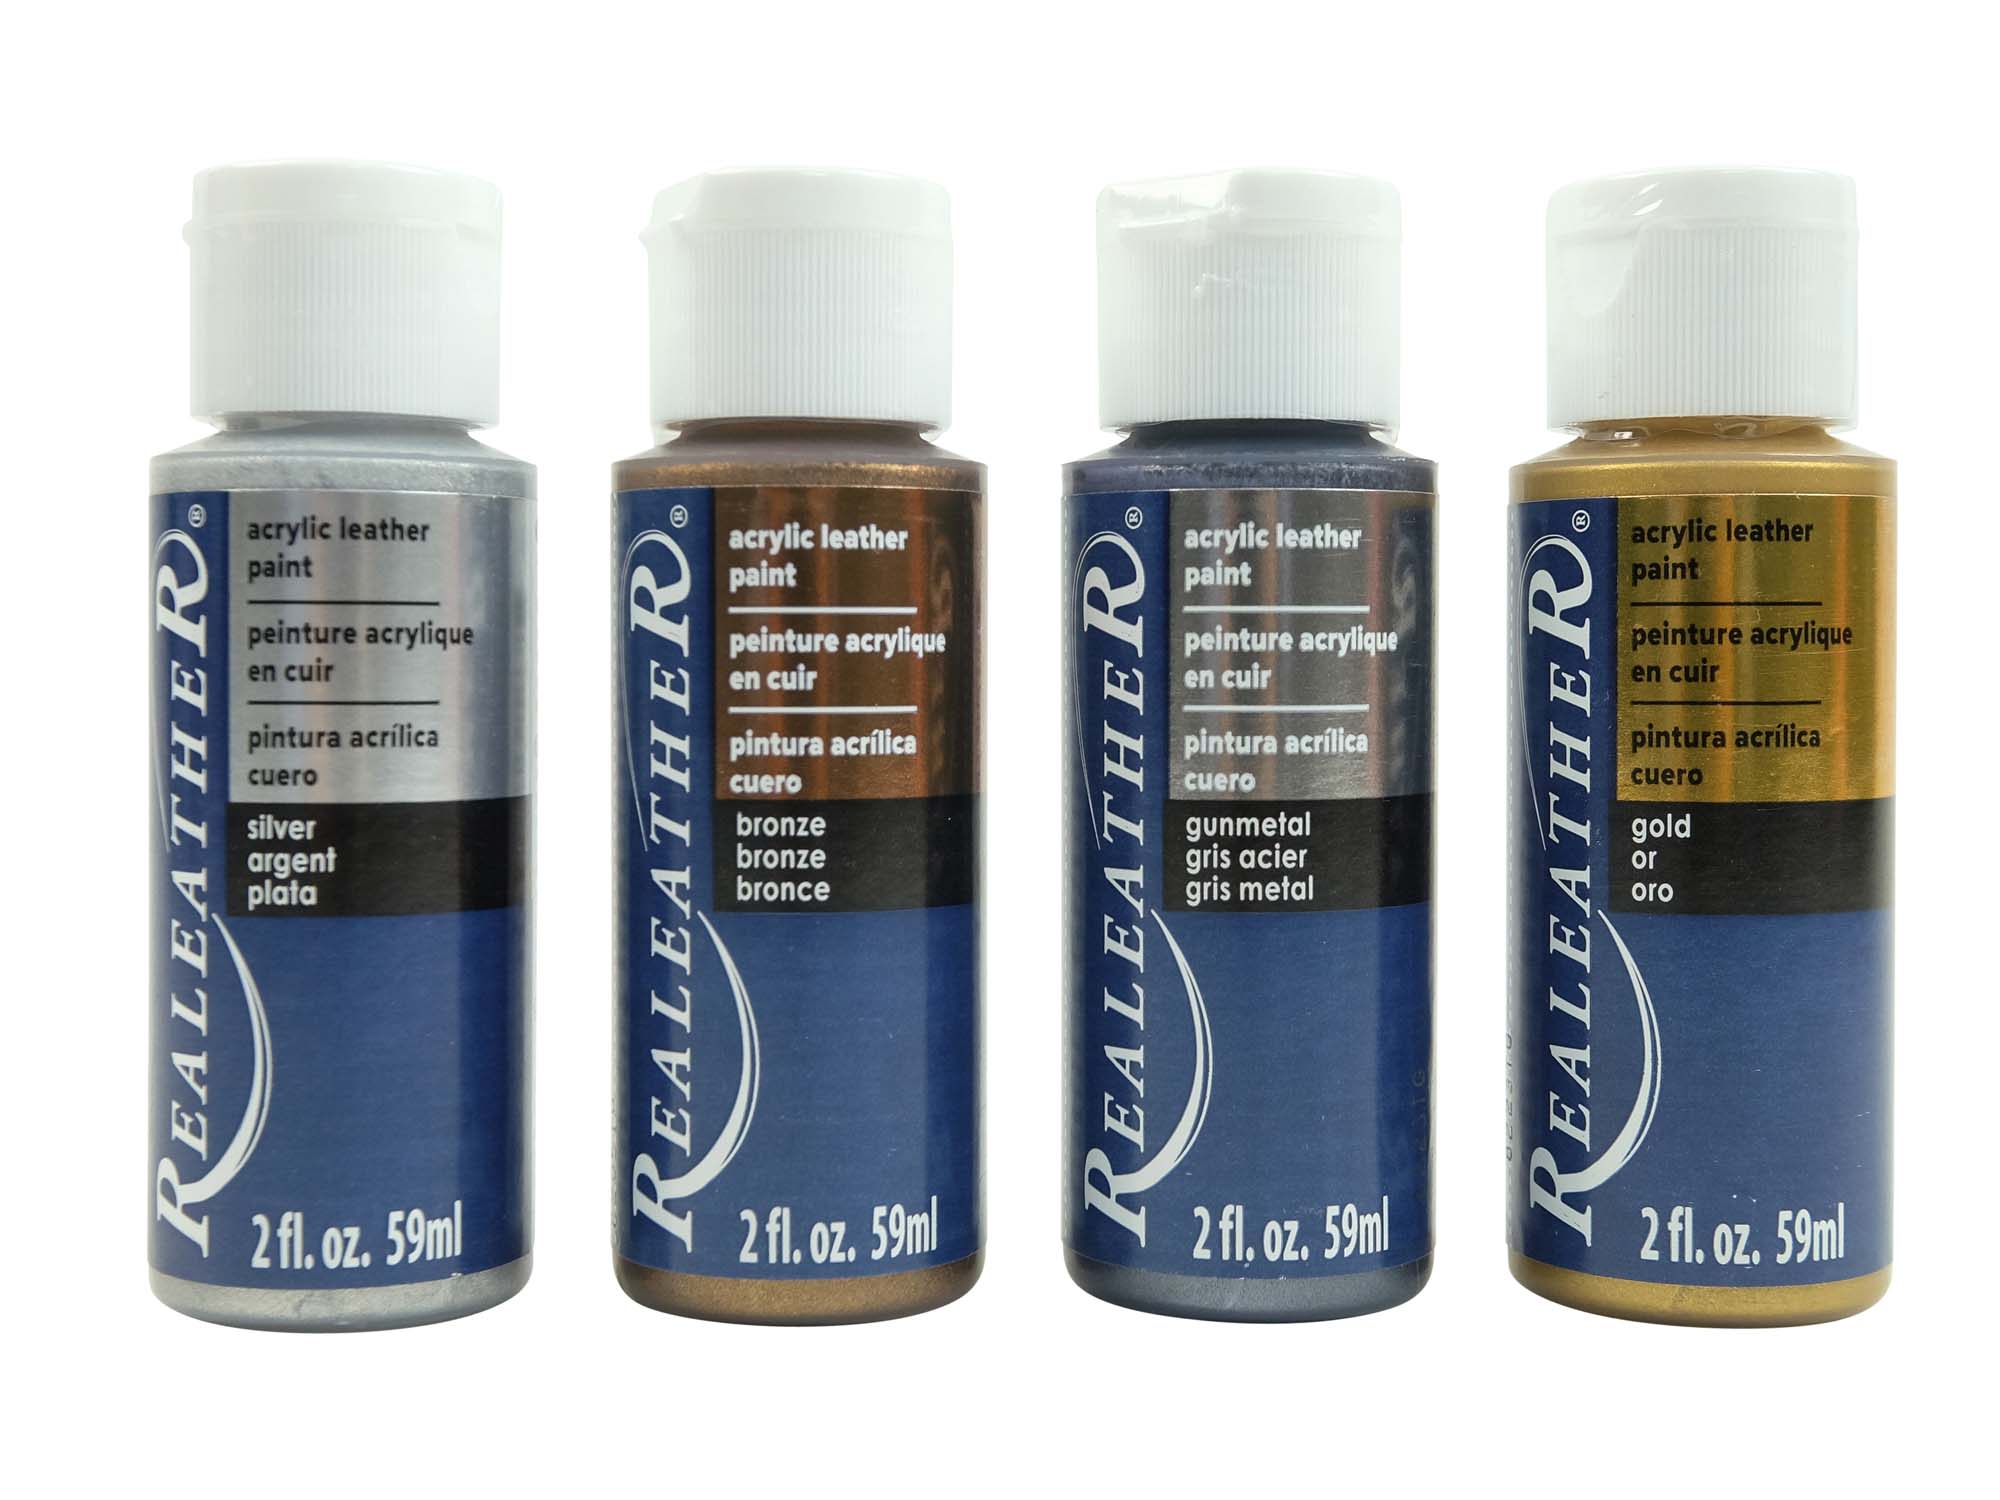 4-Pack of Acrylic Leather Paint: Metallic Colors 4 pack of acrylic leather paints, real leather paints